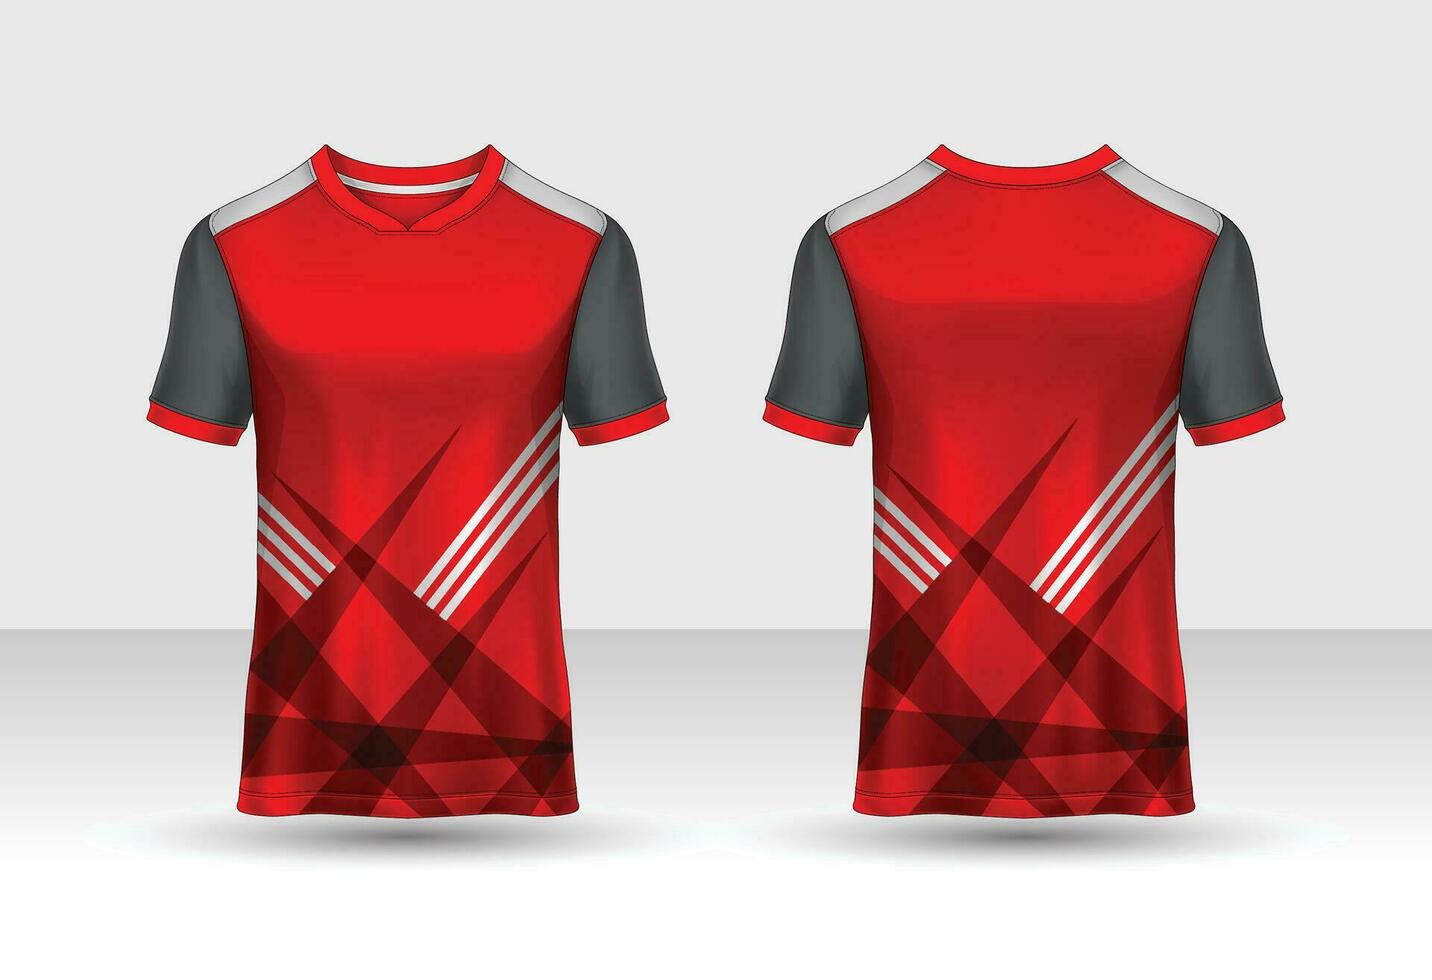 Sports jersey t shirt design concept vector template, Raglan Round neck tees football jersey concept with front and back view for Cricket, soccer, Volleyball, Rugby, tennis and badminton uniform